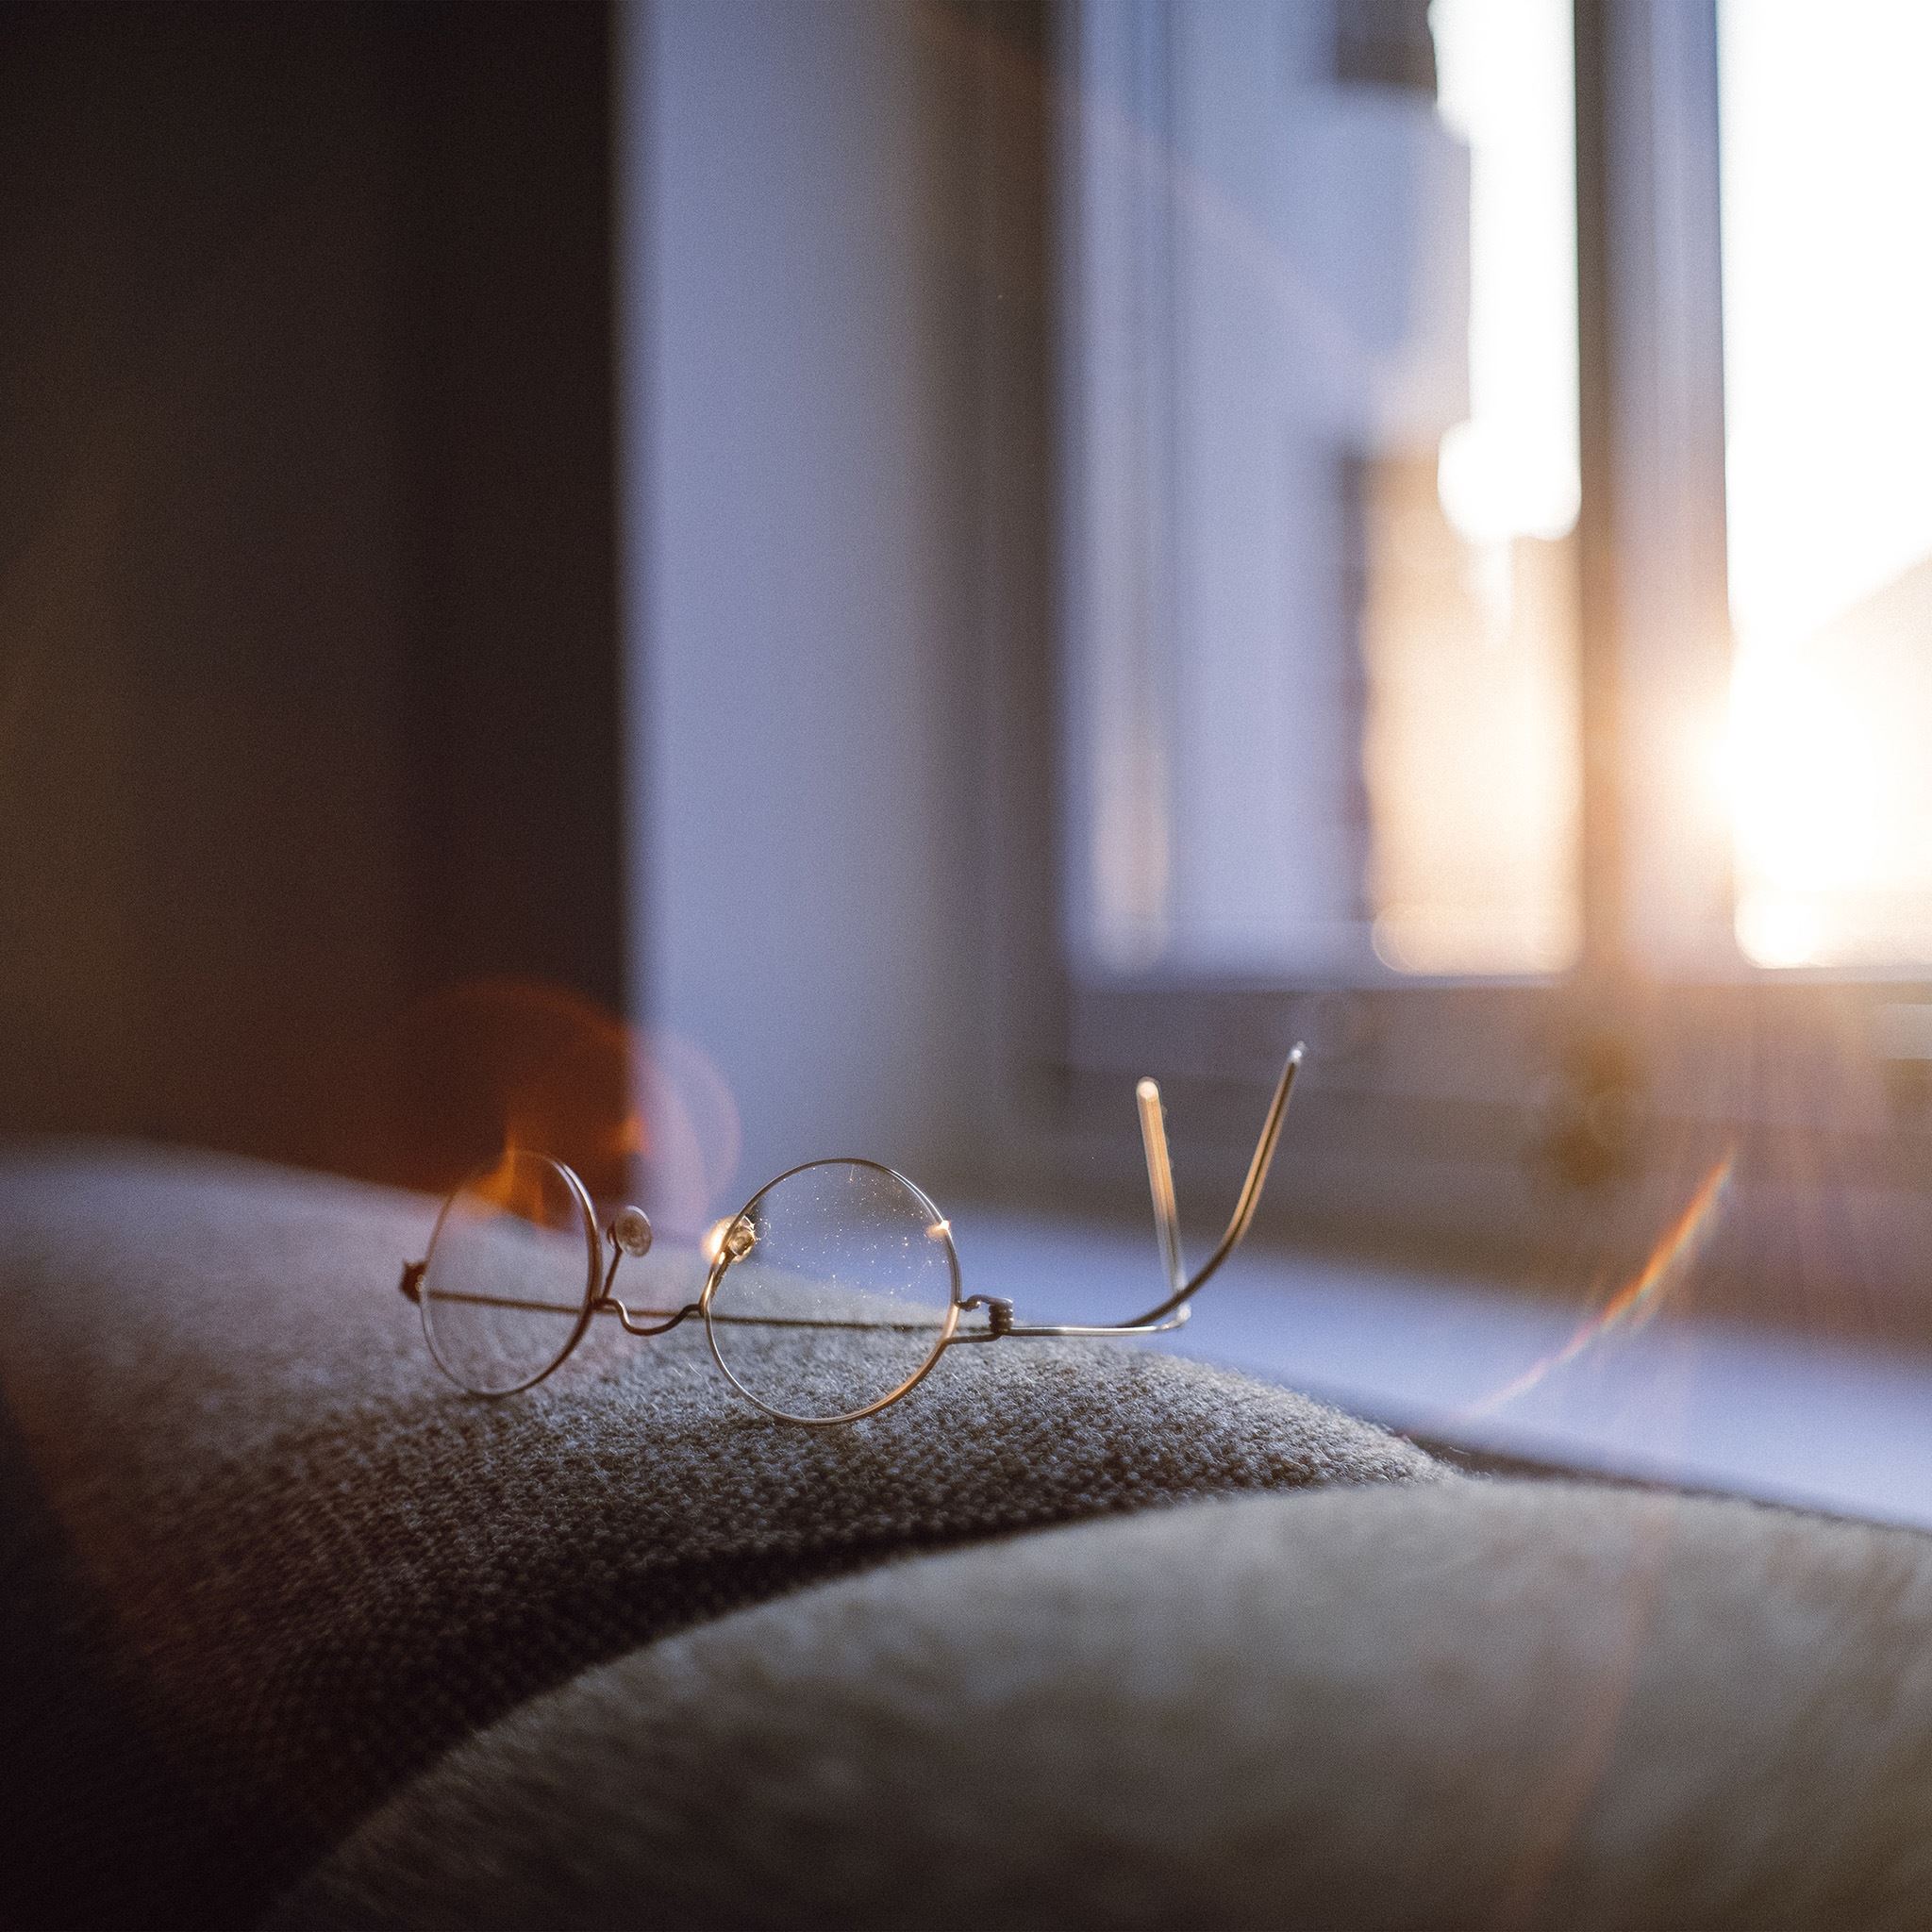 Lonly Quiet Day Home Glasses Sunlight iPad Air wallpaper 